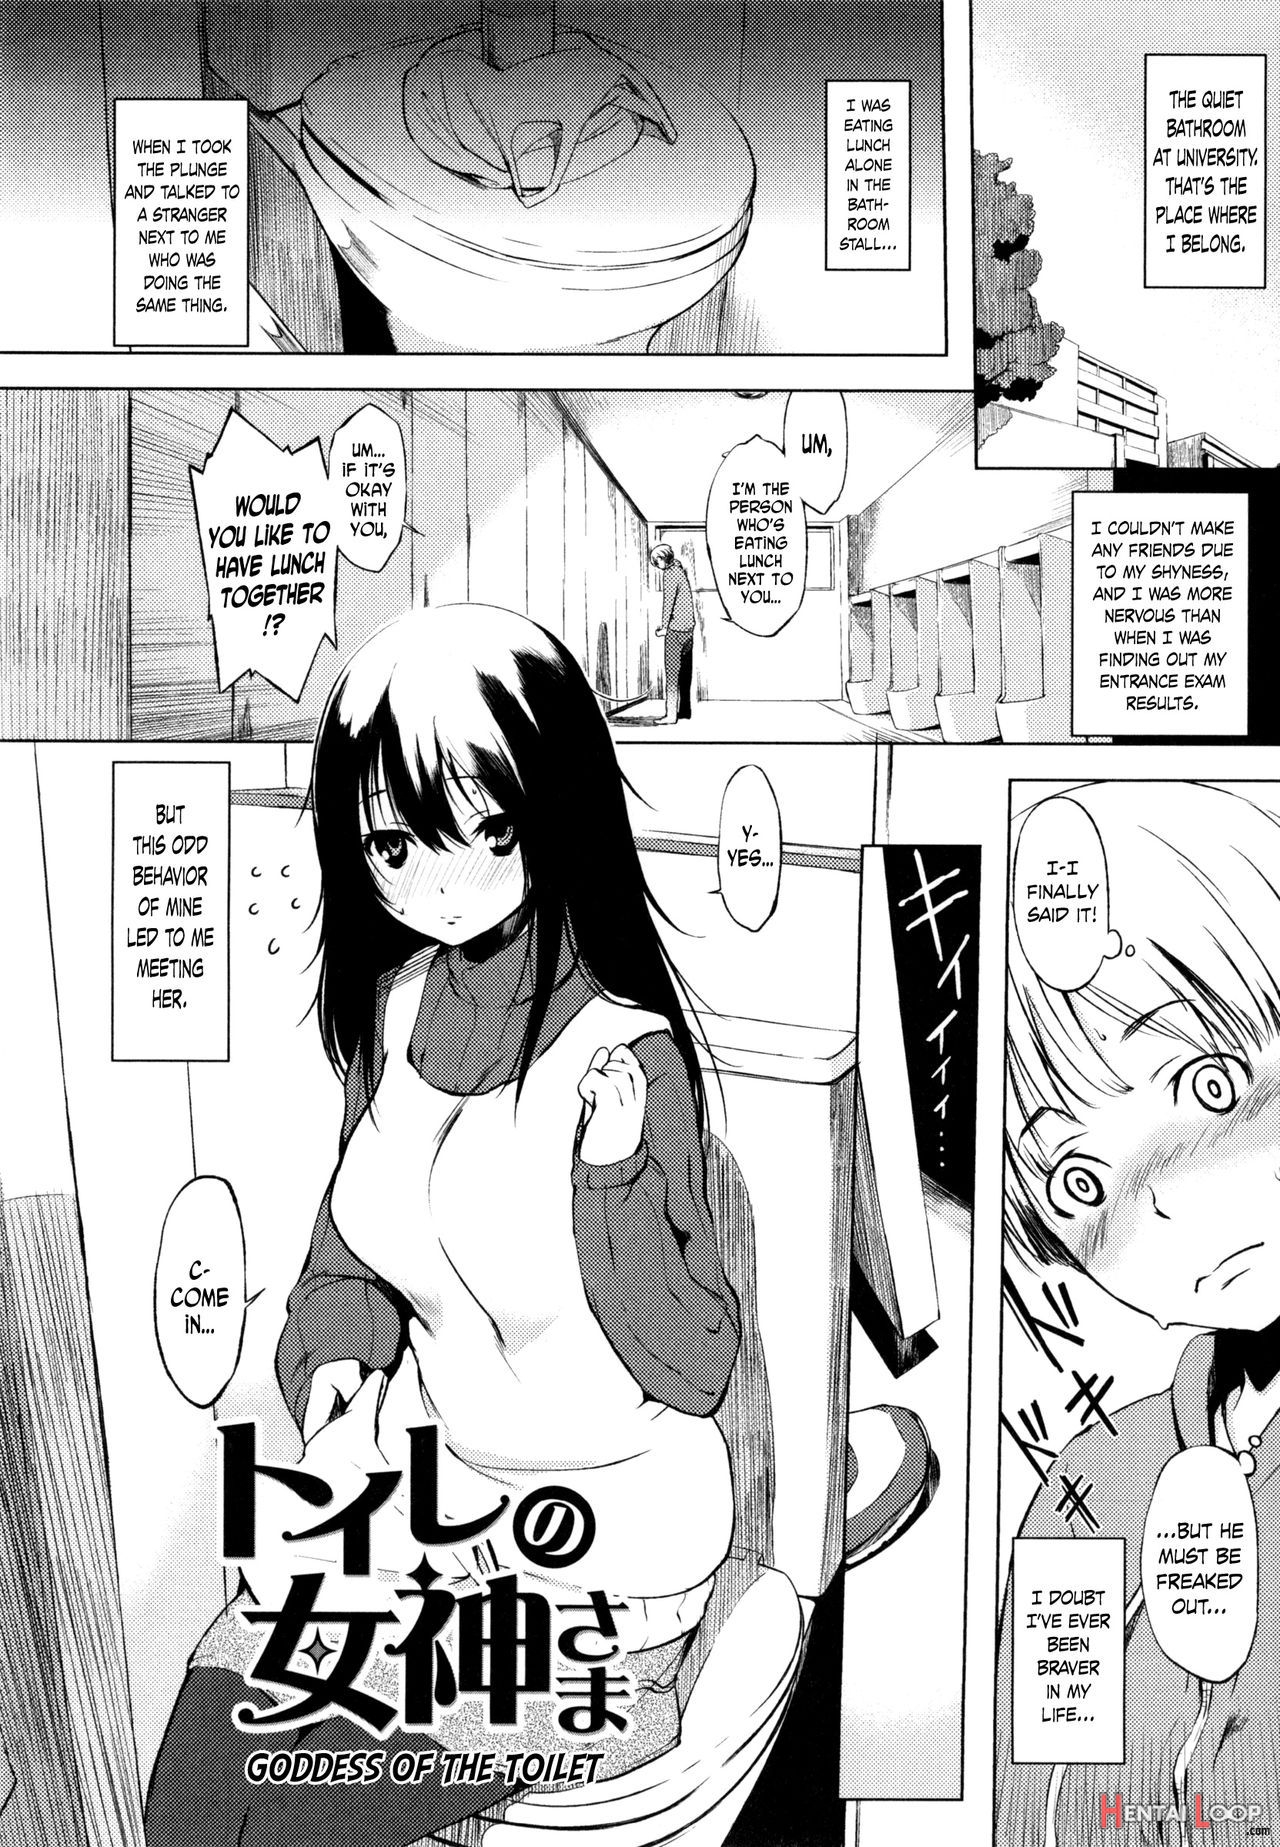 Goddess Of The Toilet page 1